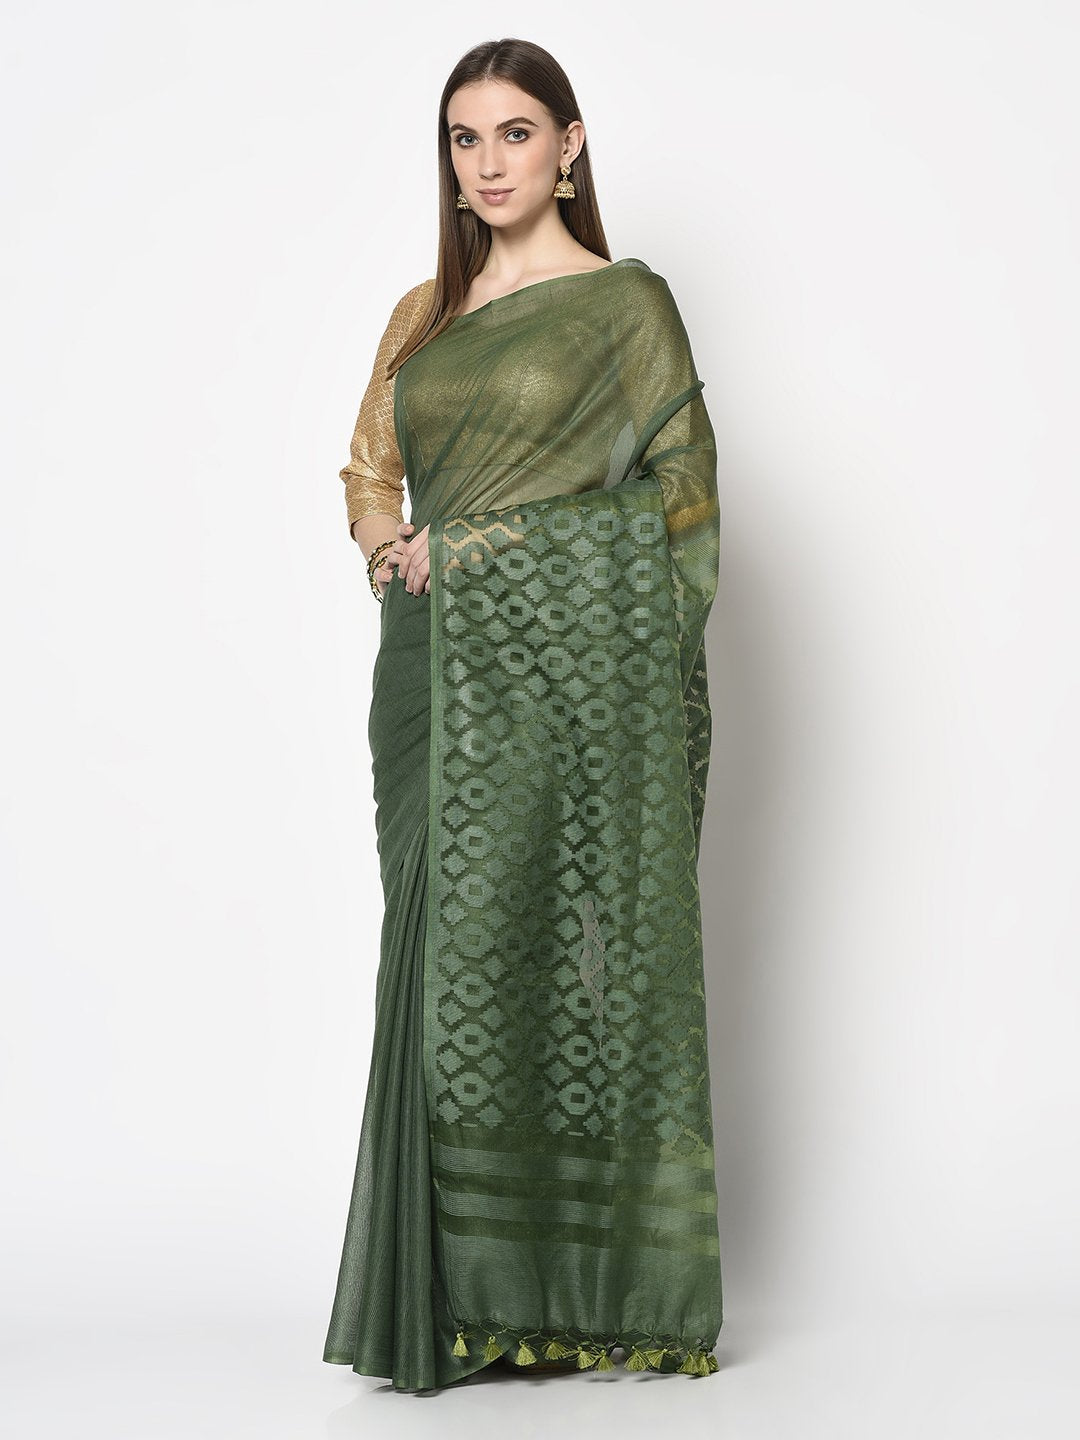 Fancy Saree In Bottle Green Color